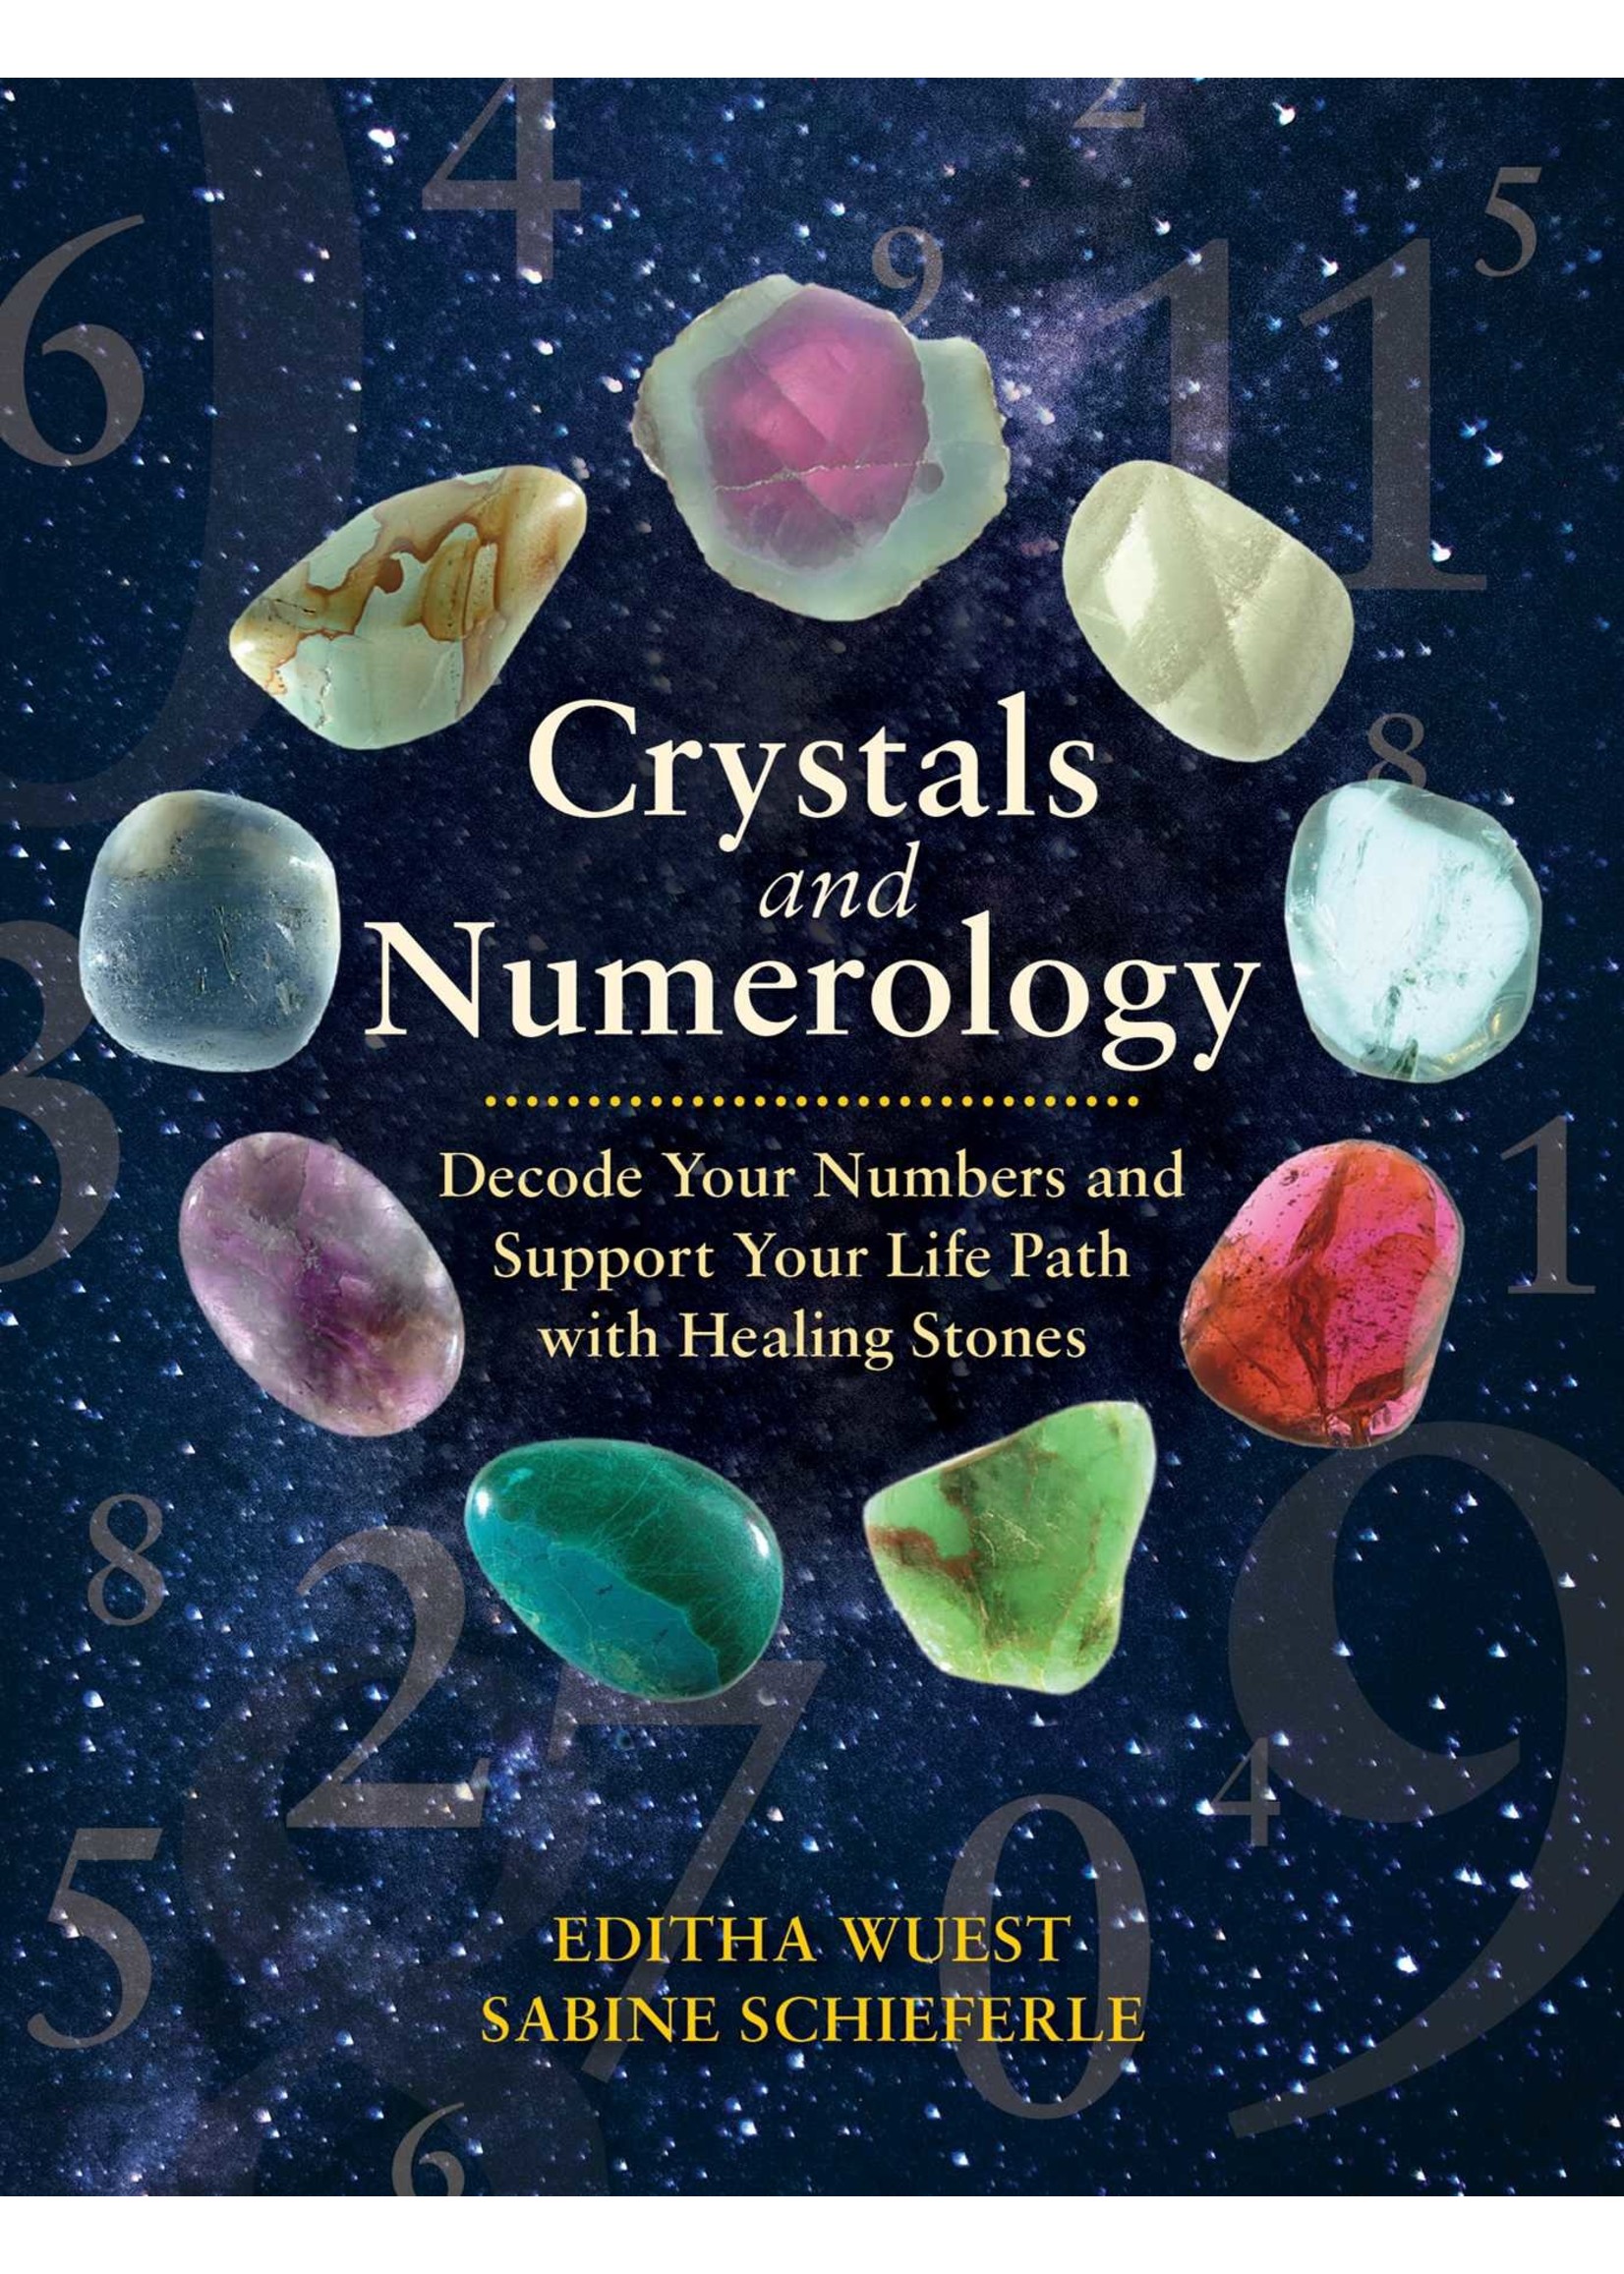 Crystals and Numerology: Decode Your Numbers and Support Your Life Path with Healing Stones by Editha Wuest,  Sabine Schieferle